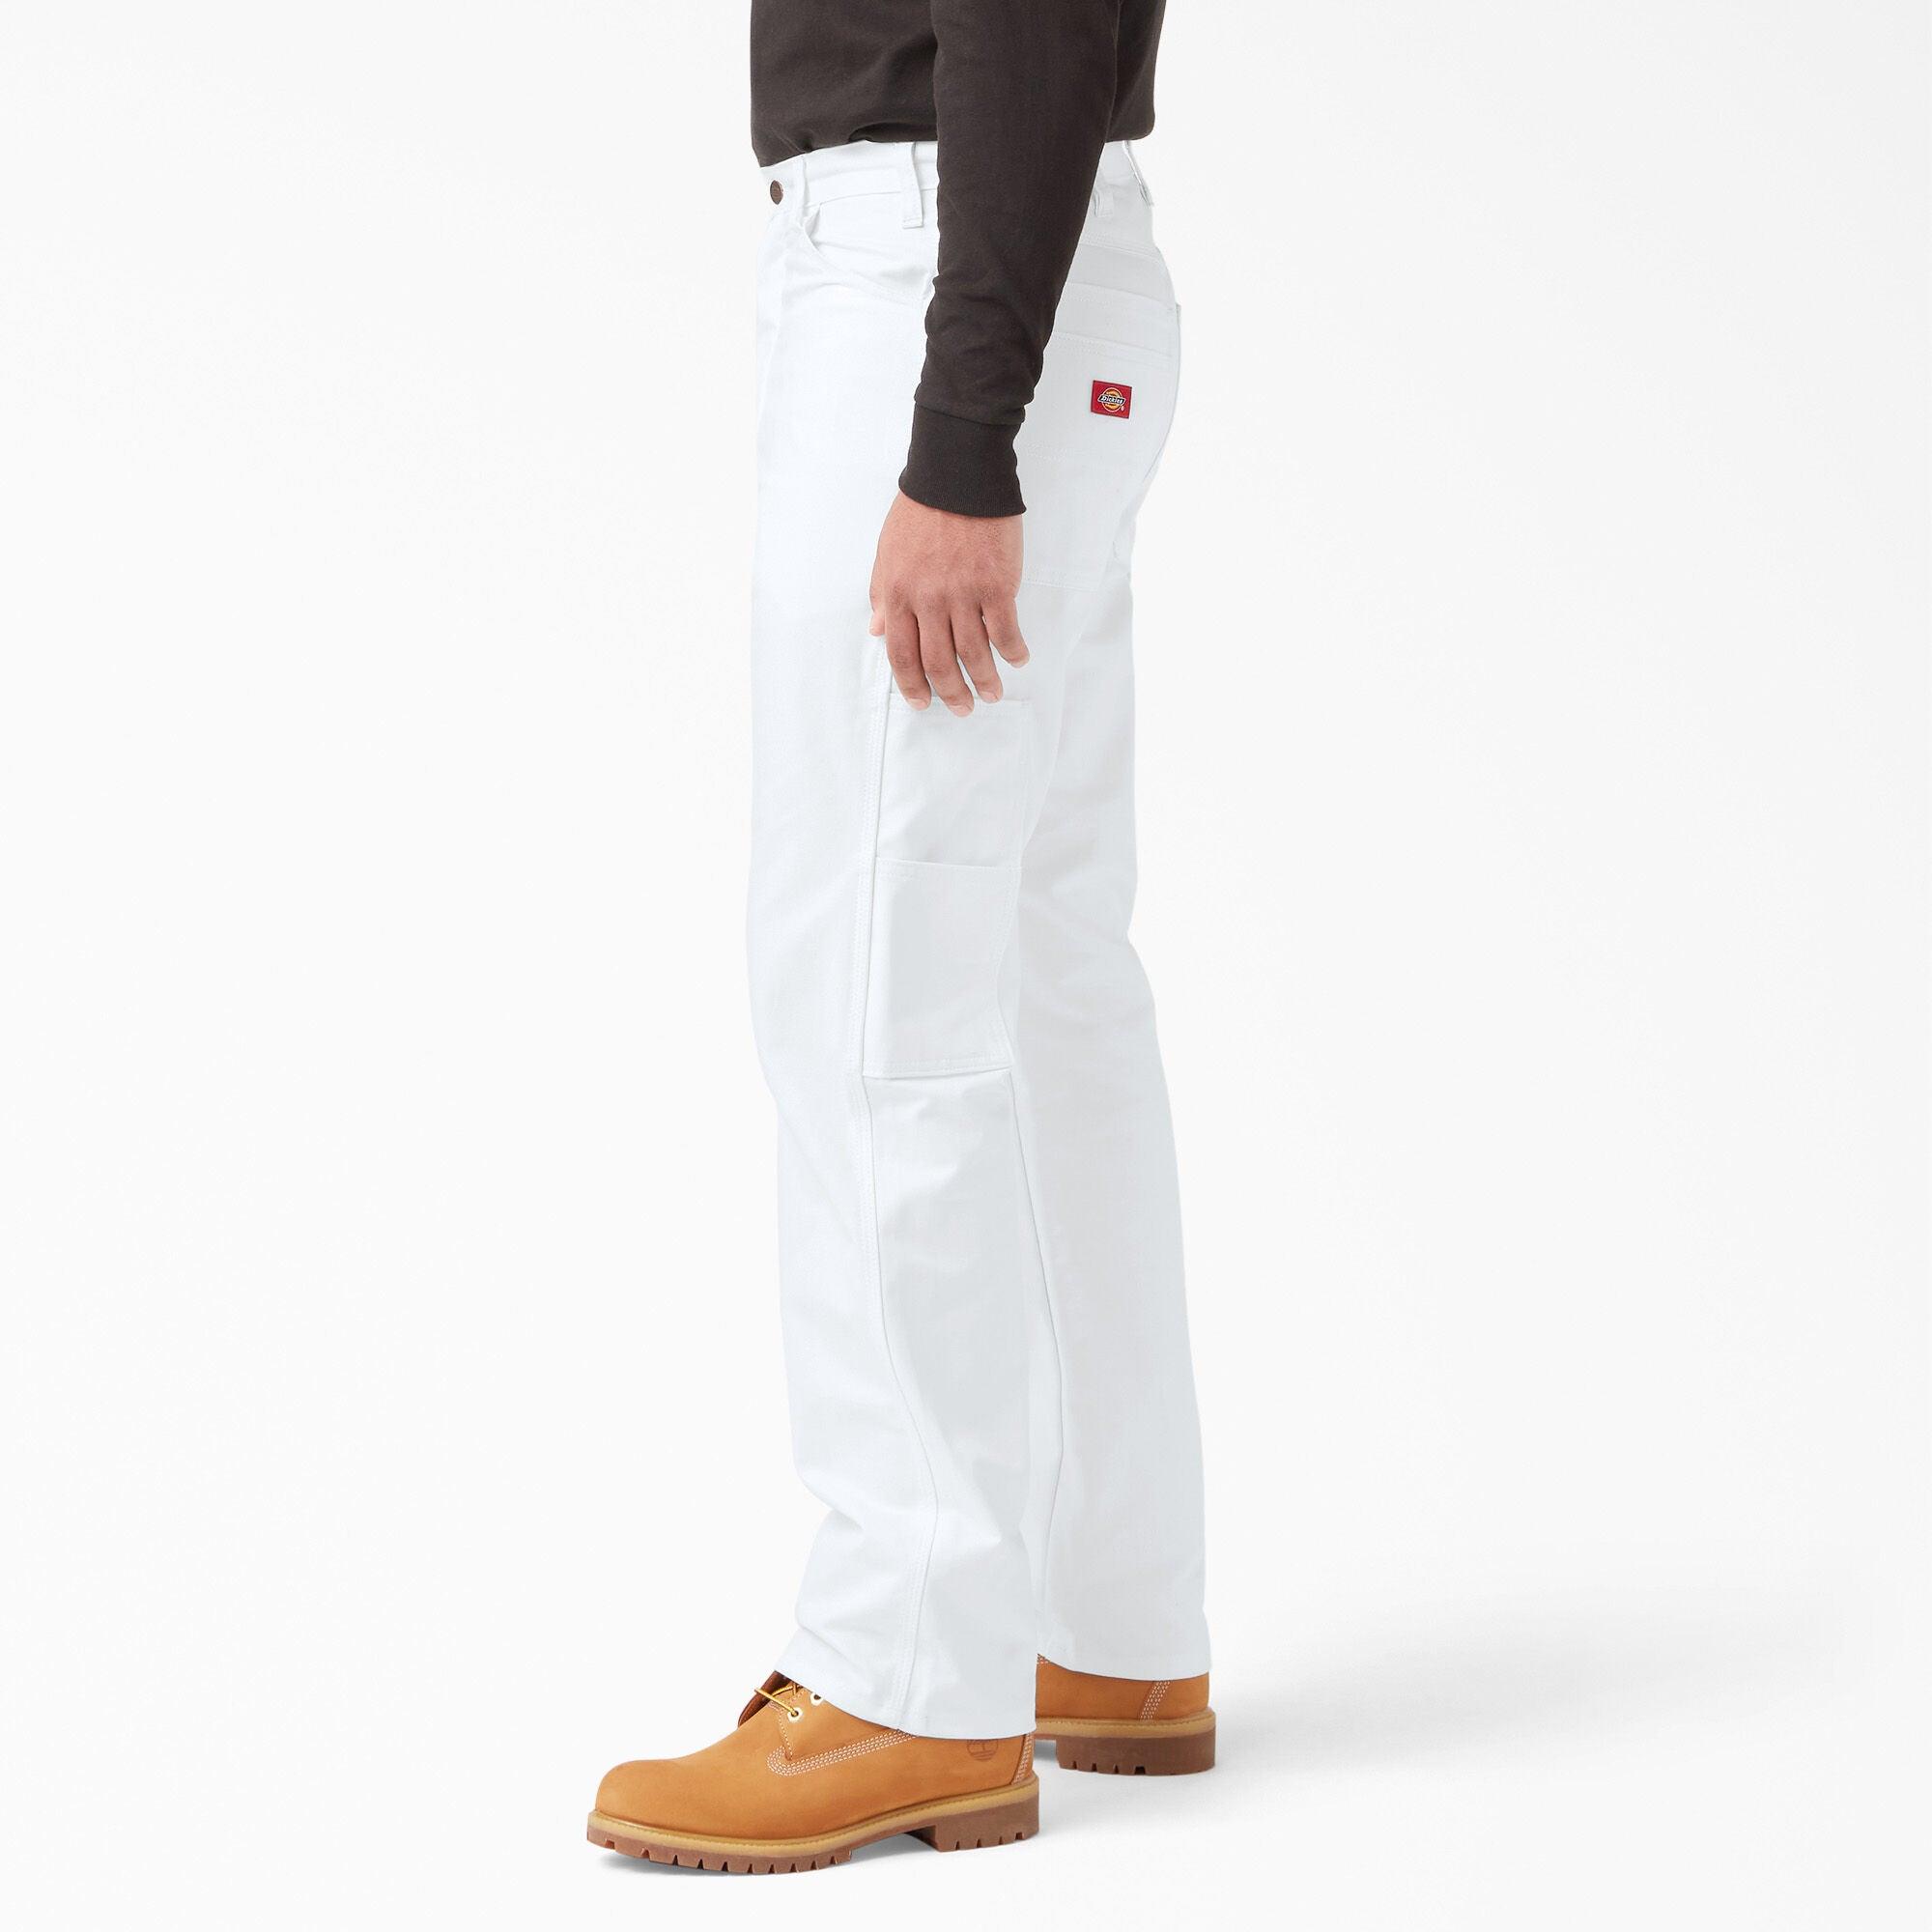 Relaxed Fit Straight Leg Painter's Pants, White